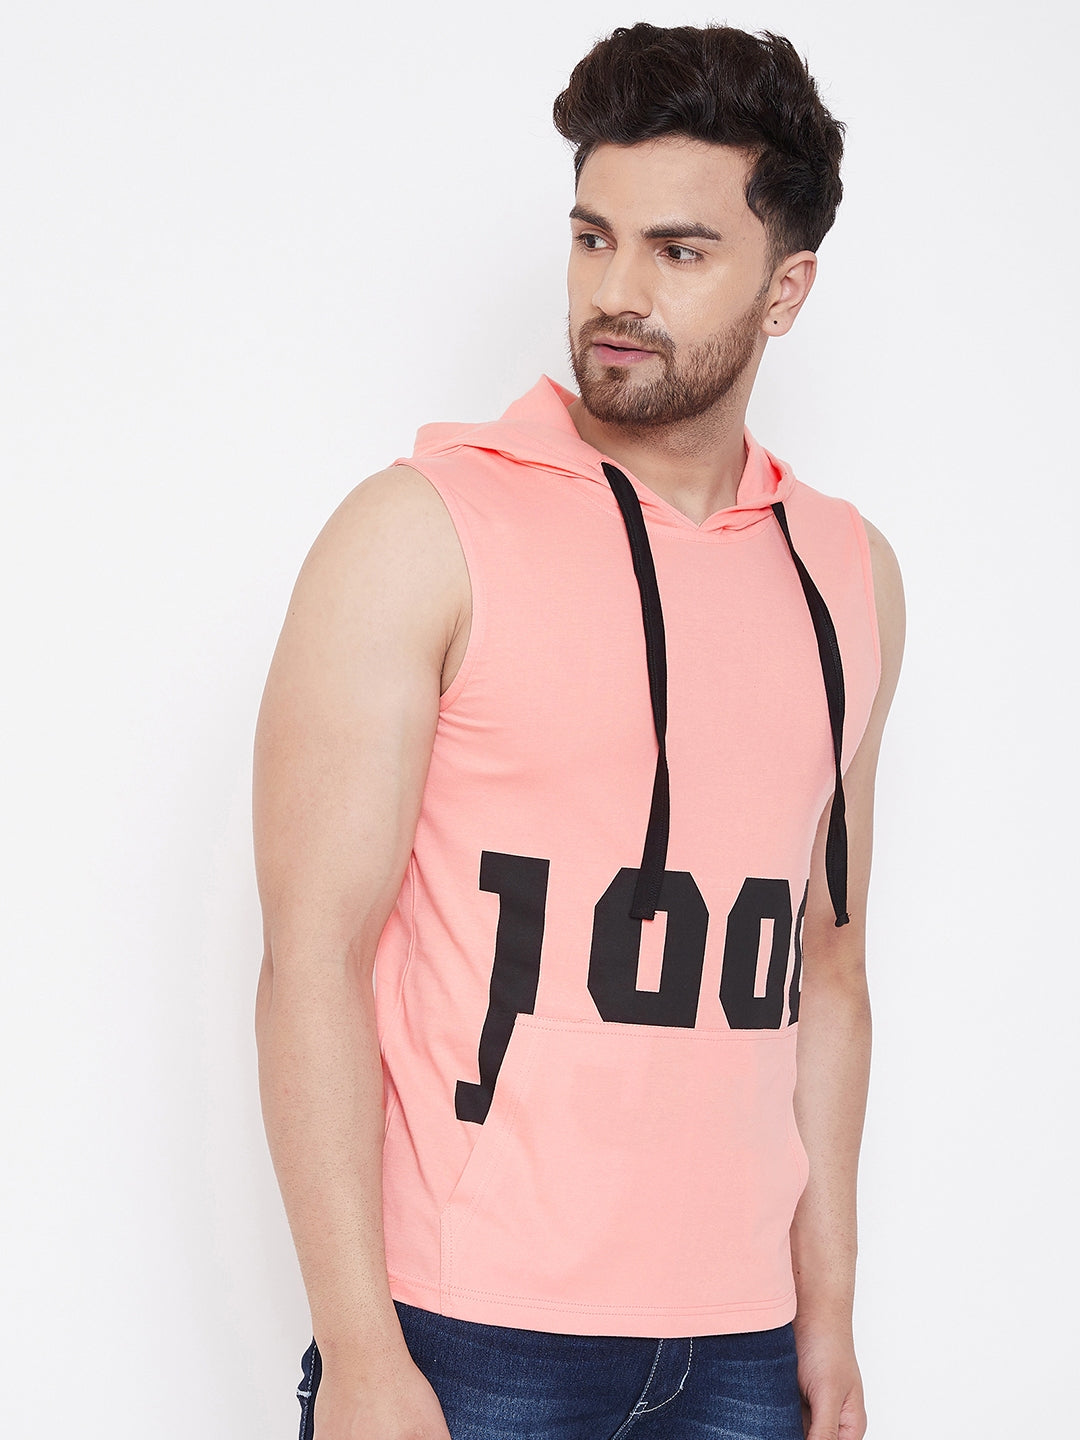 Coral Men's  Gym Hooded Printed Sleeveless T-Shirt